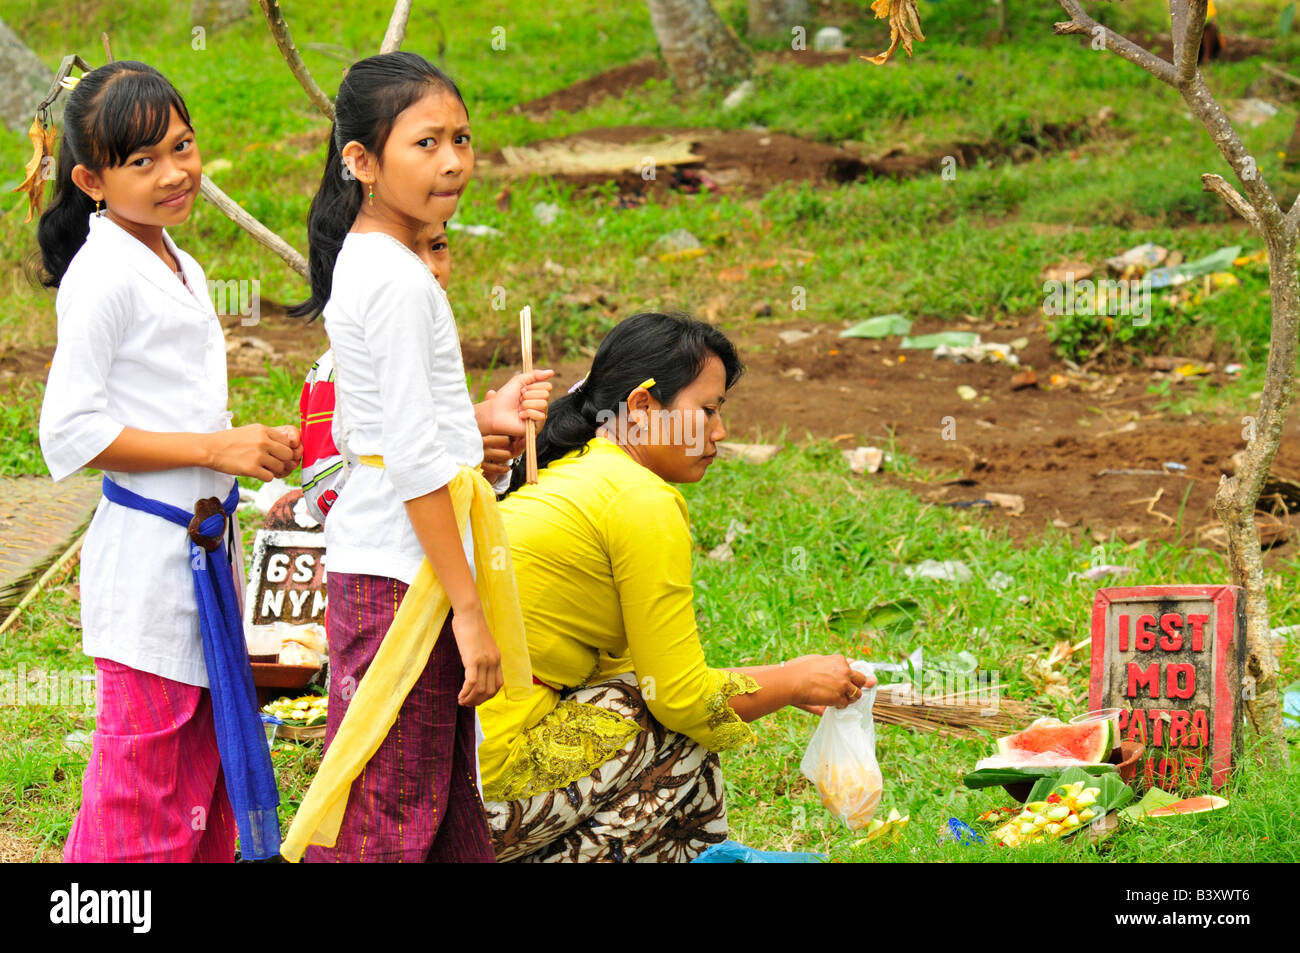 Women laying down Offerings , Temple Festival (Odalan),mengwi, Bali, Indonesia Stock Photo